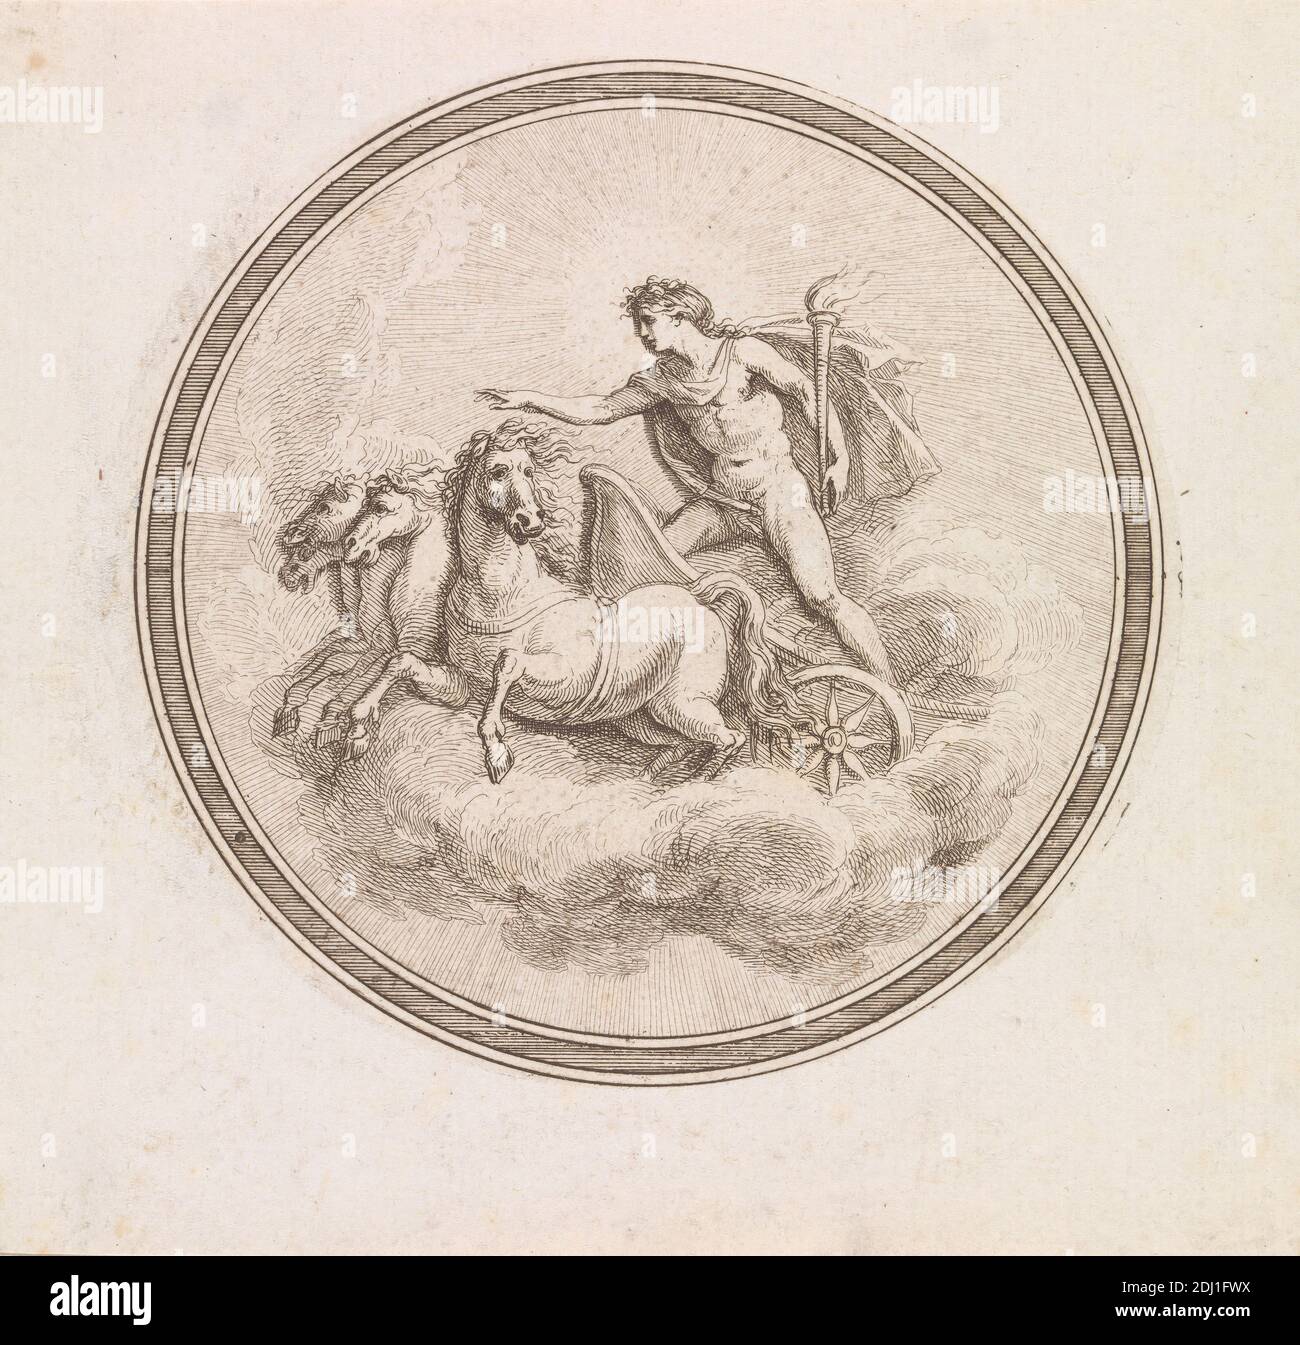 Man with Flaming Torch in Four Horse Chariot, Representing Sun, Apollo, Francesco Bartolozzi RA, 1728–1815, Italian, active in Britain (1764–99), after unknown artist, undated, Engraving Stock Photo